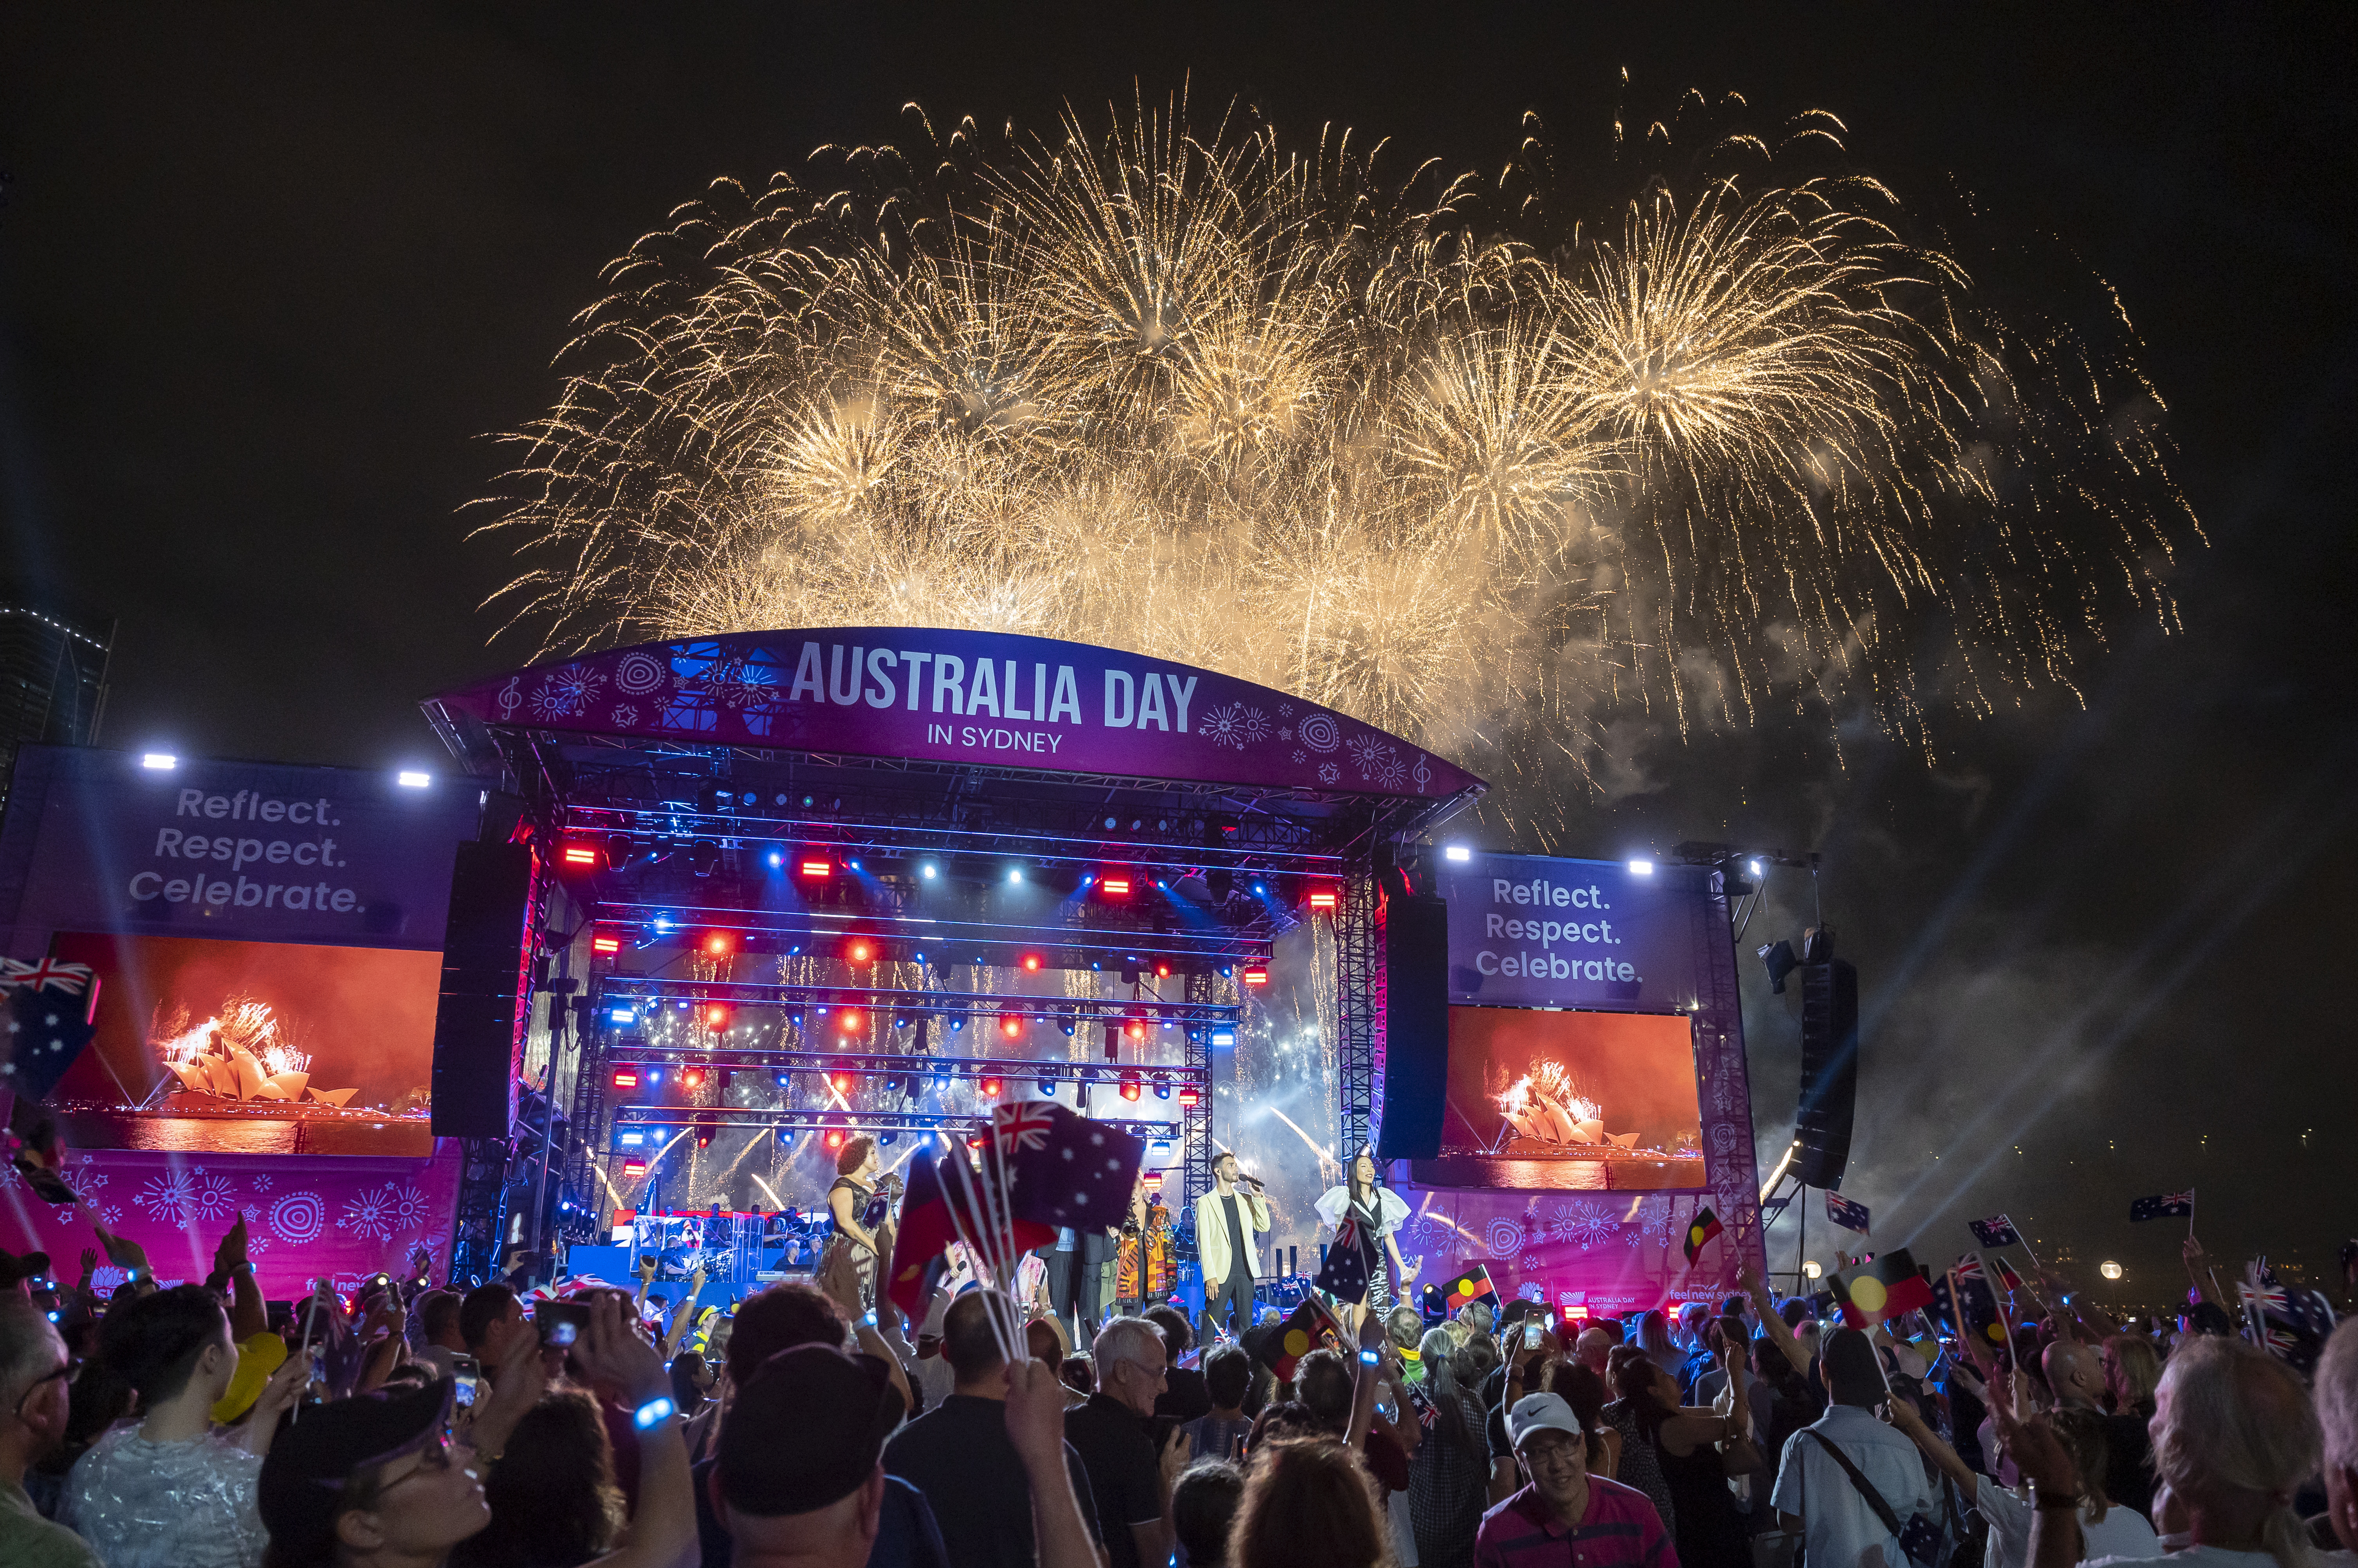 Australia Day Live at the Sydney Opera House and Circular Quay